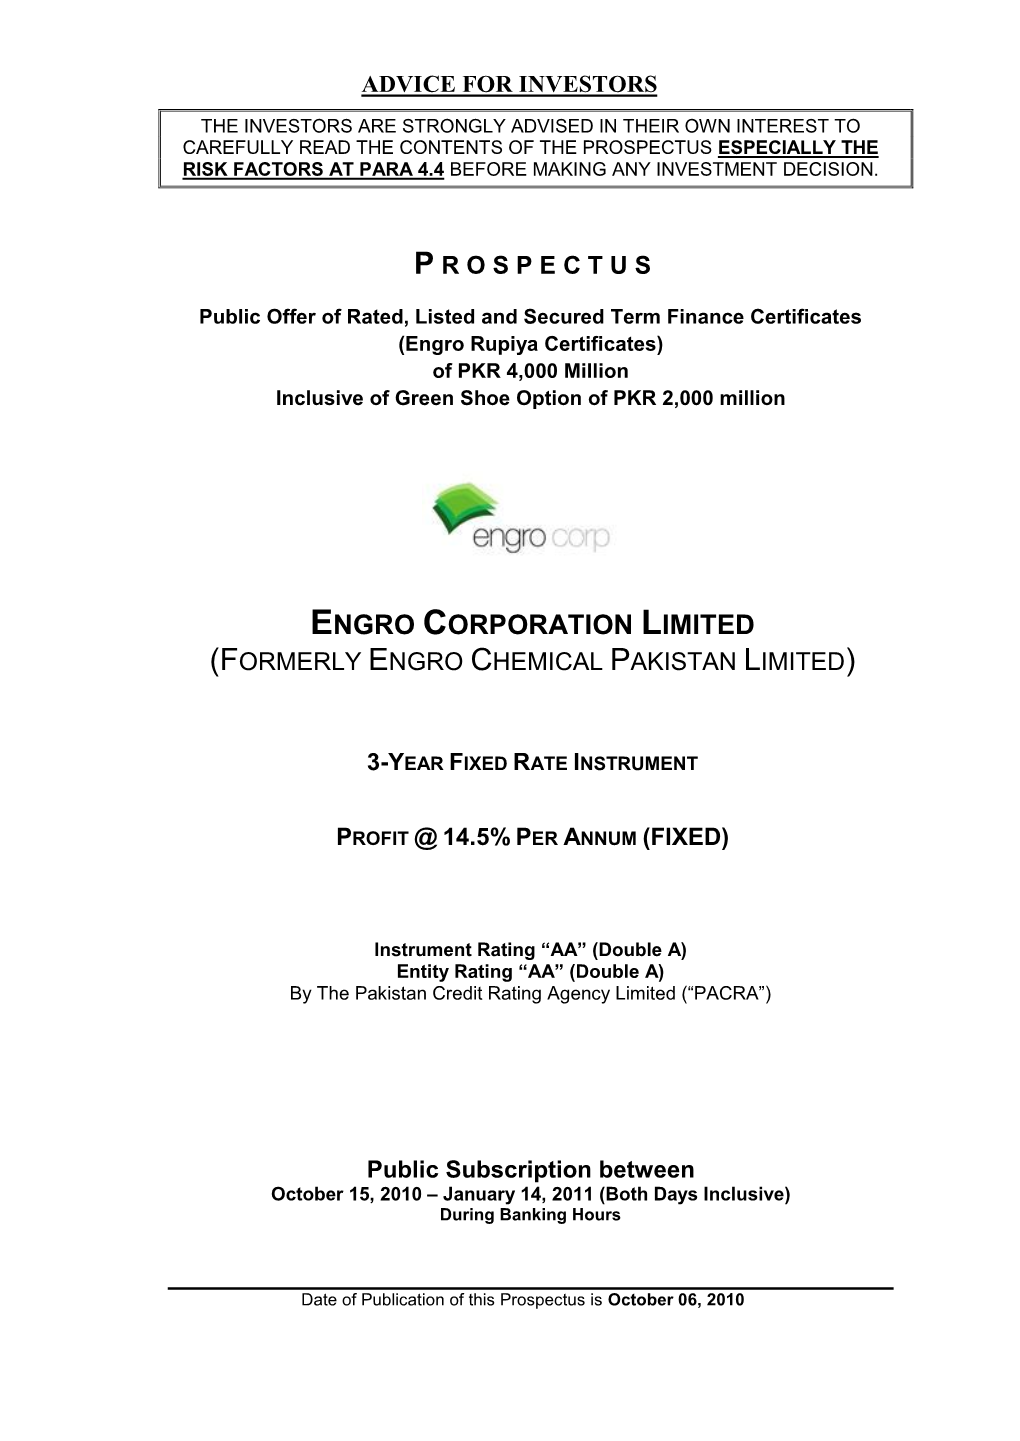 Engro Corporation Limited (Formerly Engro Chemical Pakistan Limited)